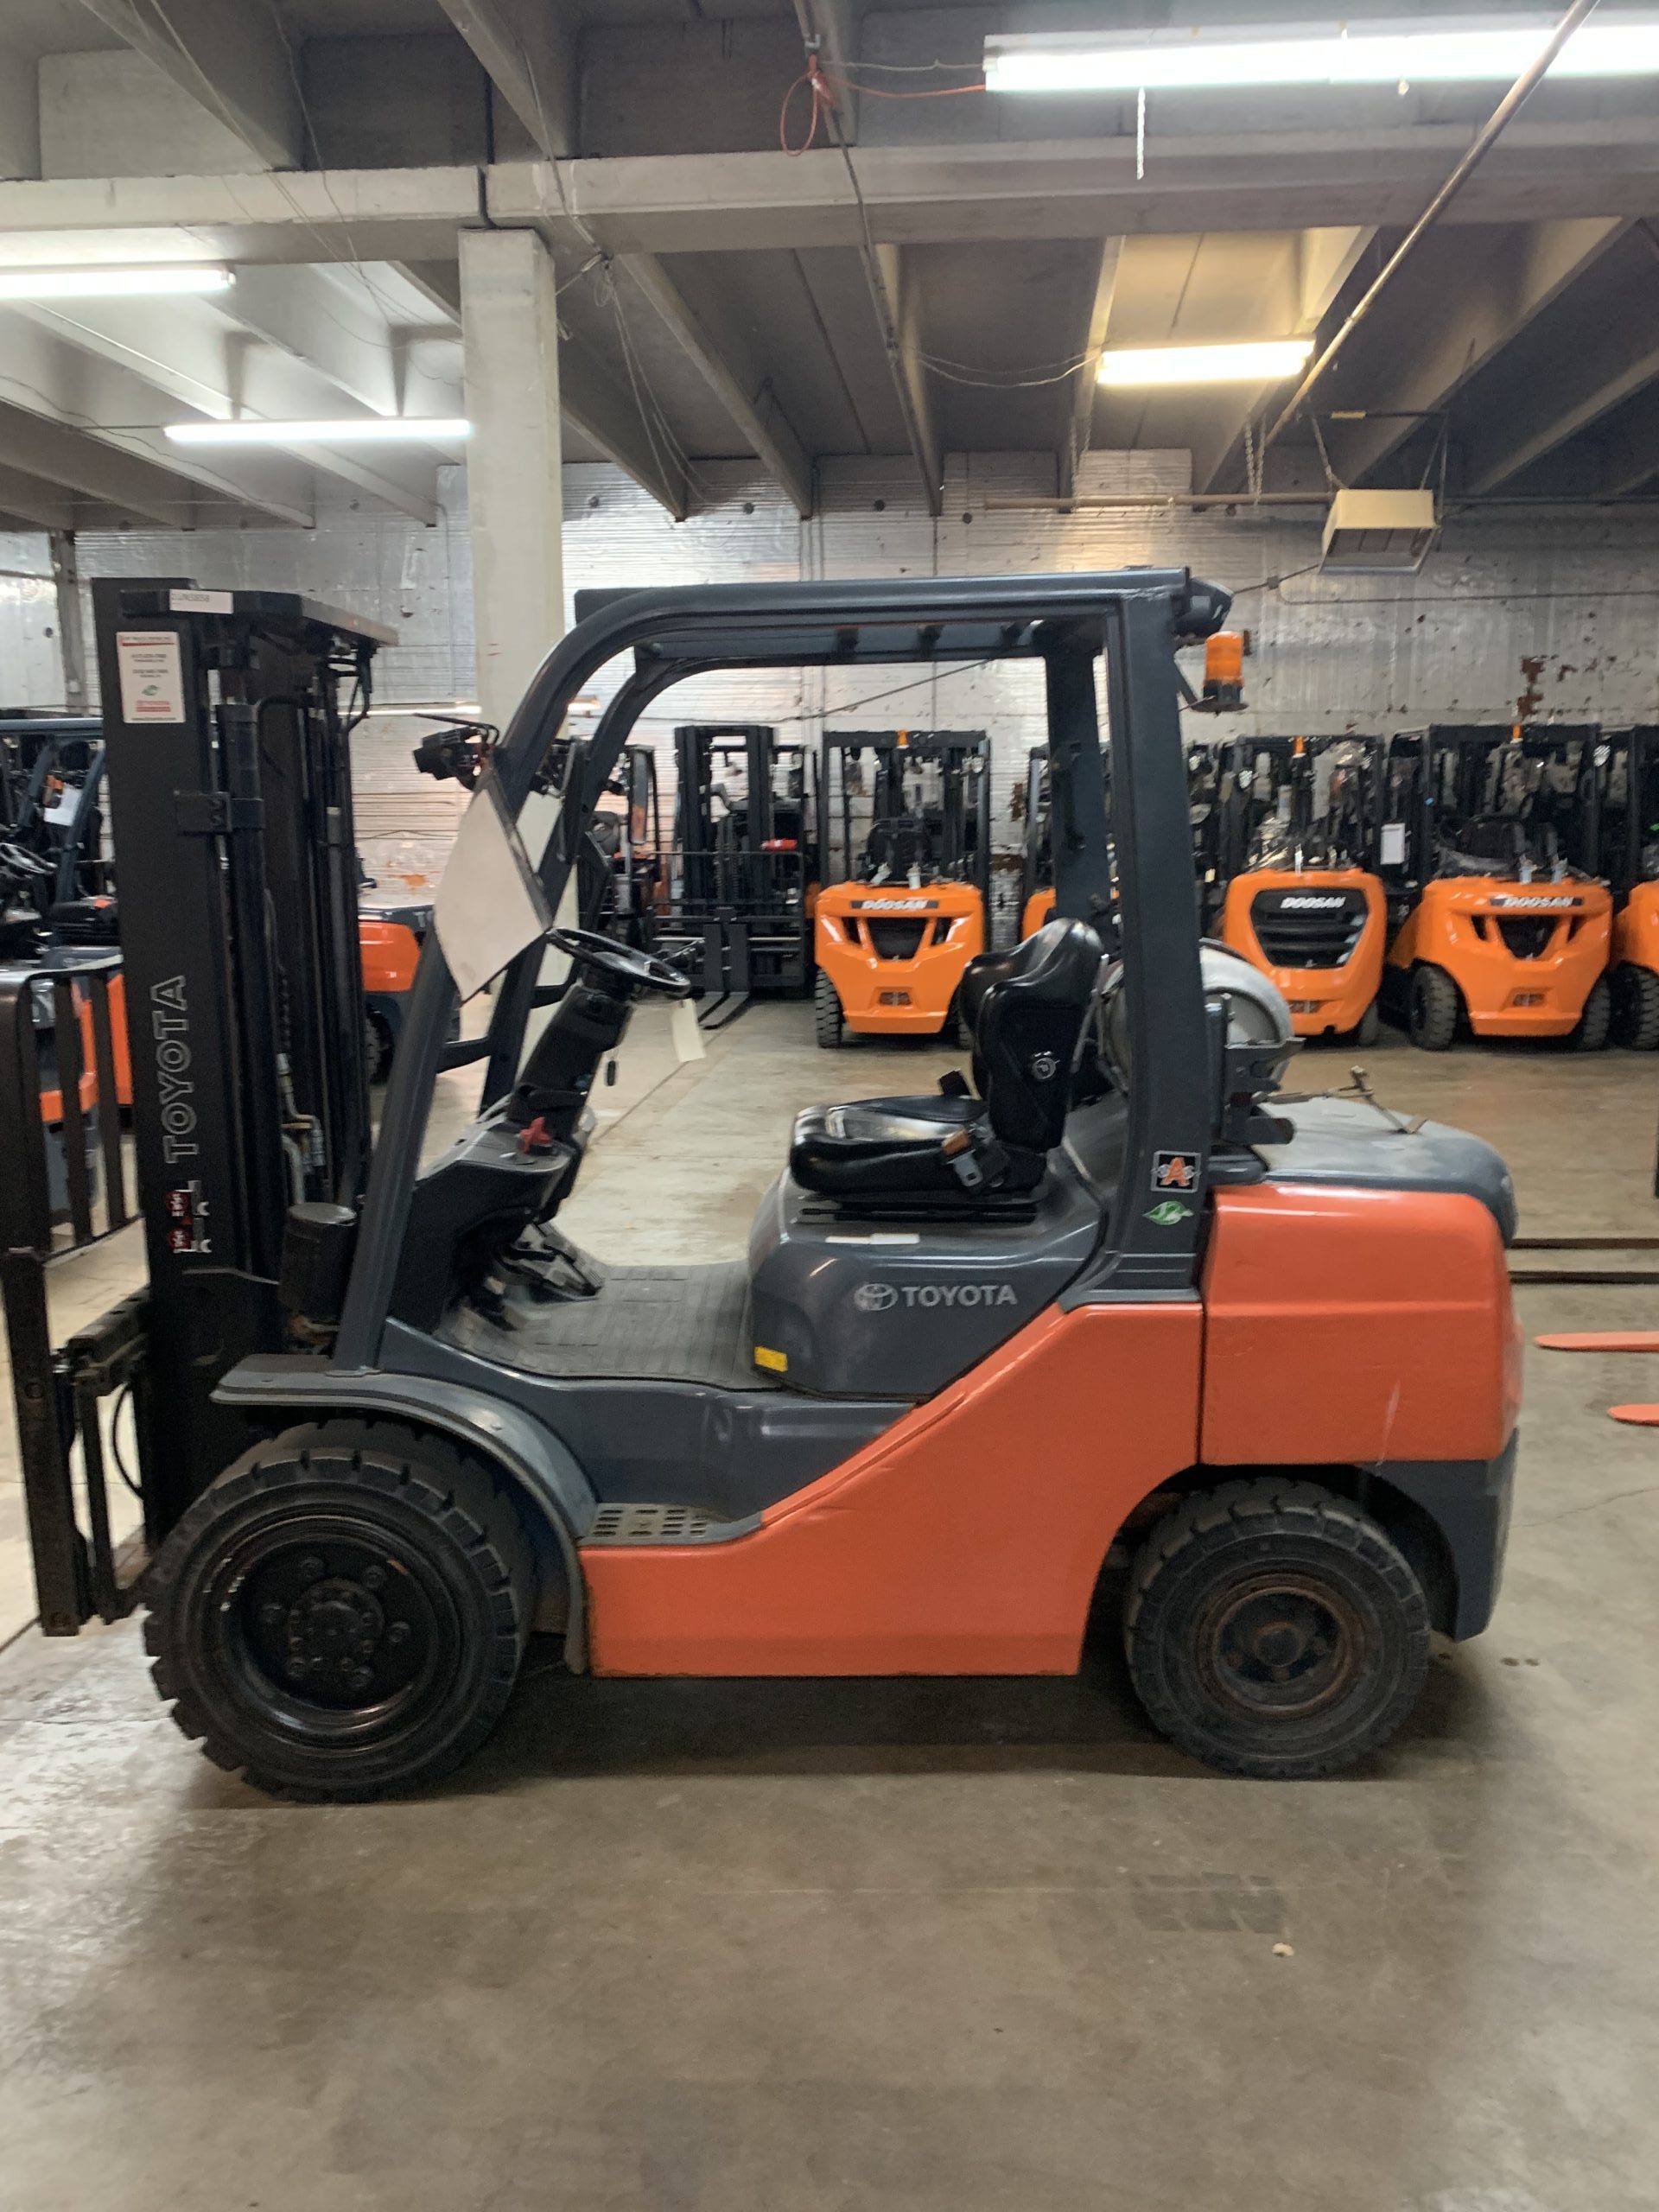 Featured image for “TOYOTA 6,000 LBS. CAPACITY PNEUMATIC TIRED FORKLIFT”